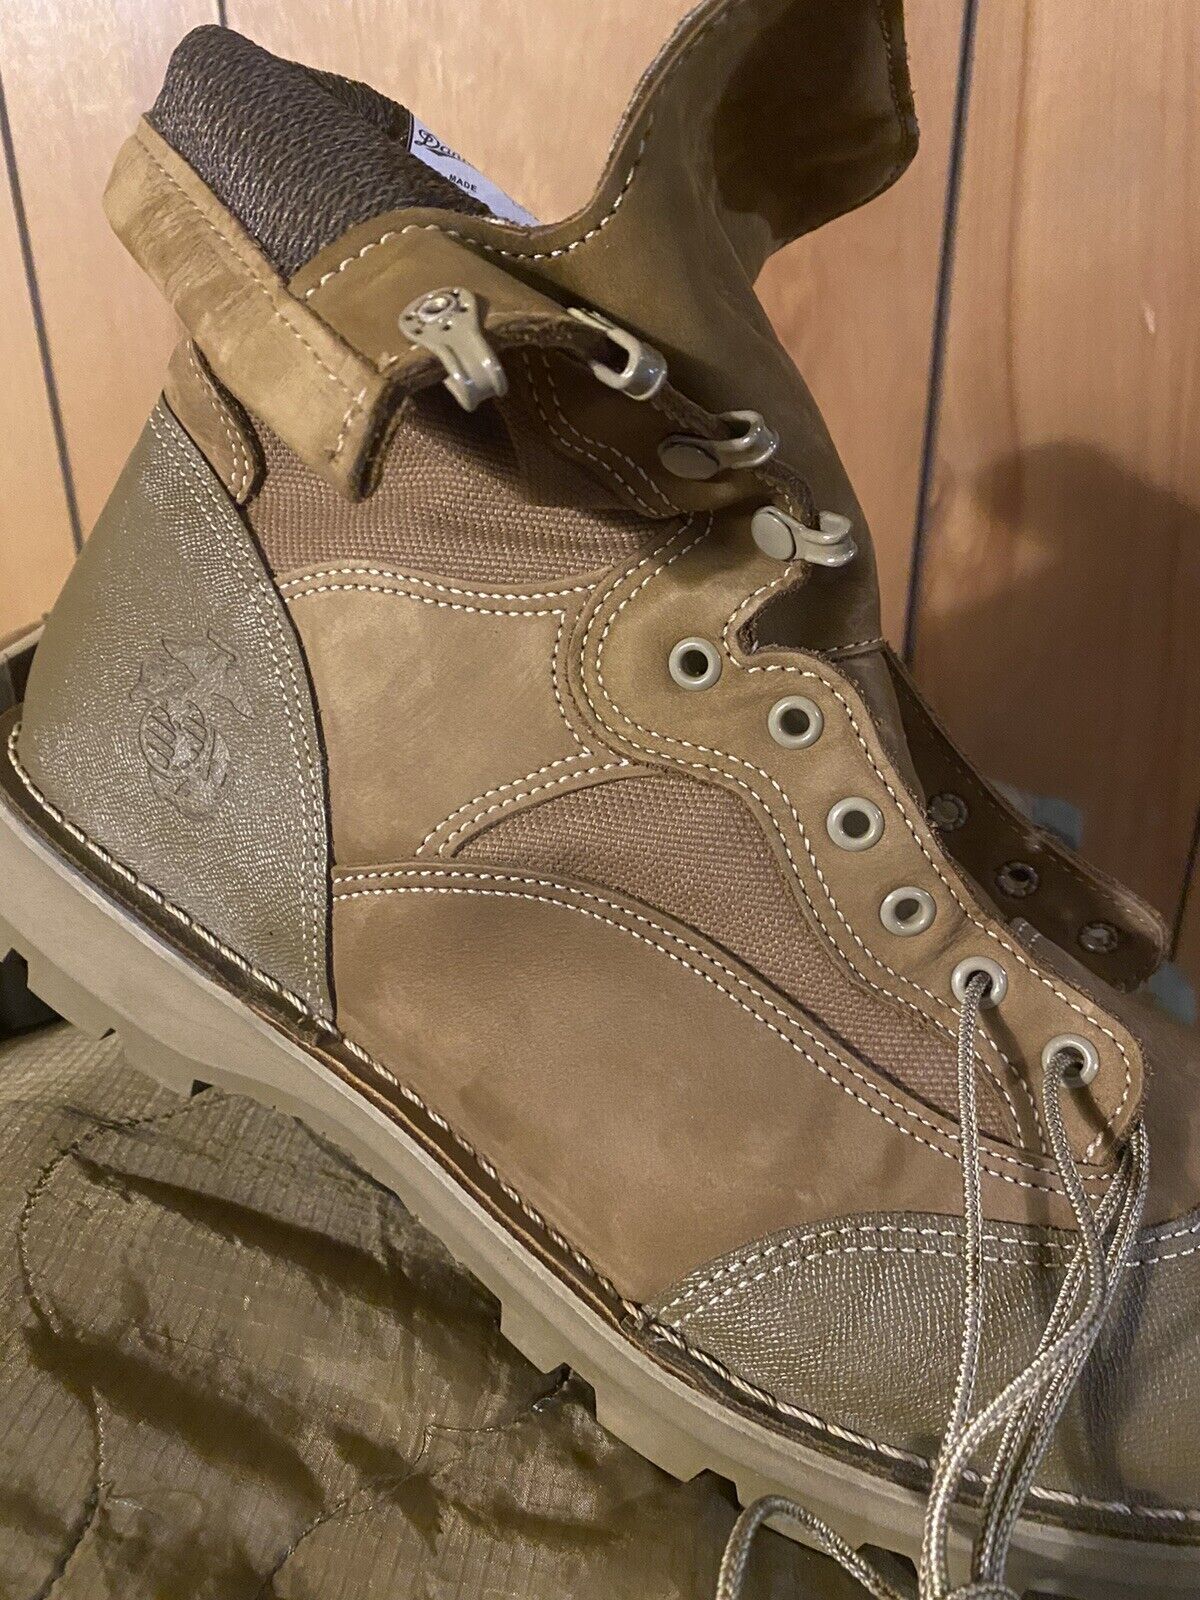 SIZE 15XW or14.5 XW USMC RAT TEMPERATE BOOT Waterproof Gortx Nu old stock w/box.